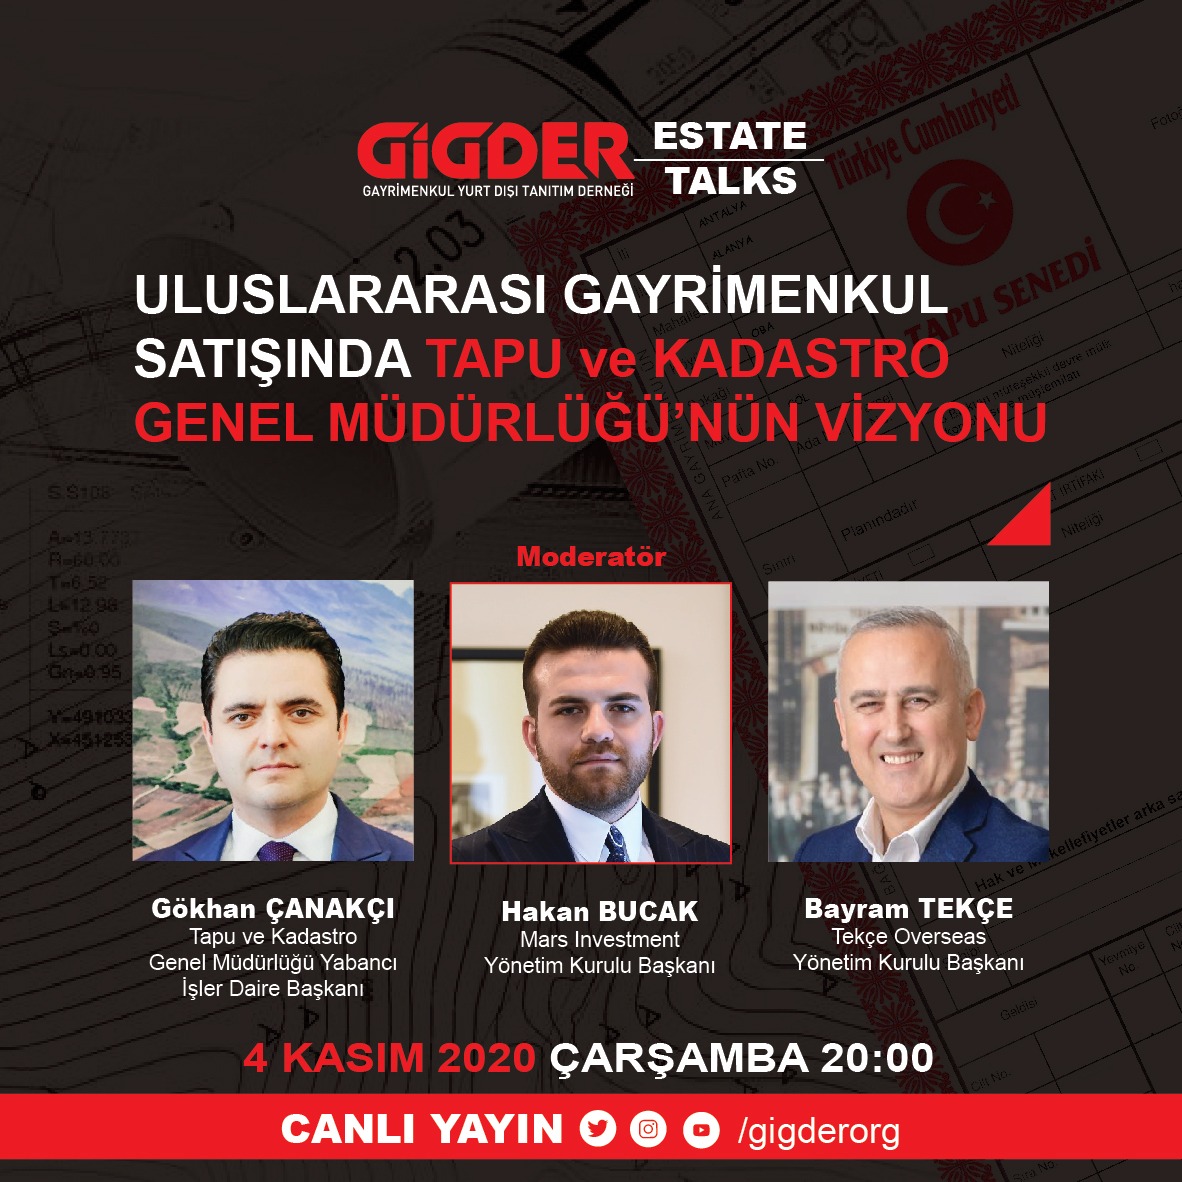 The Vision Of The General Directorate Of Land Registry And Cadastre In Overseas Real Estate Sales